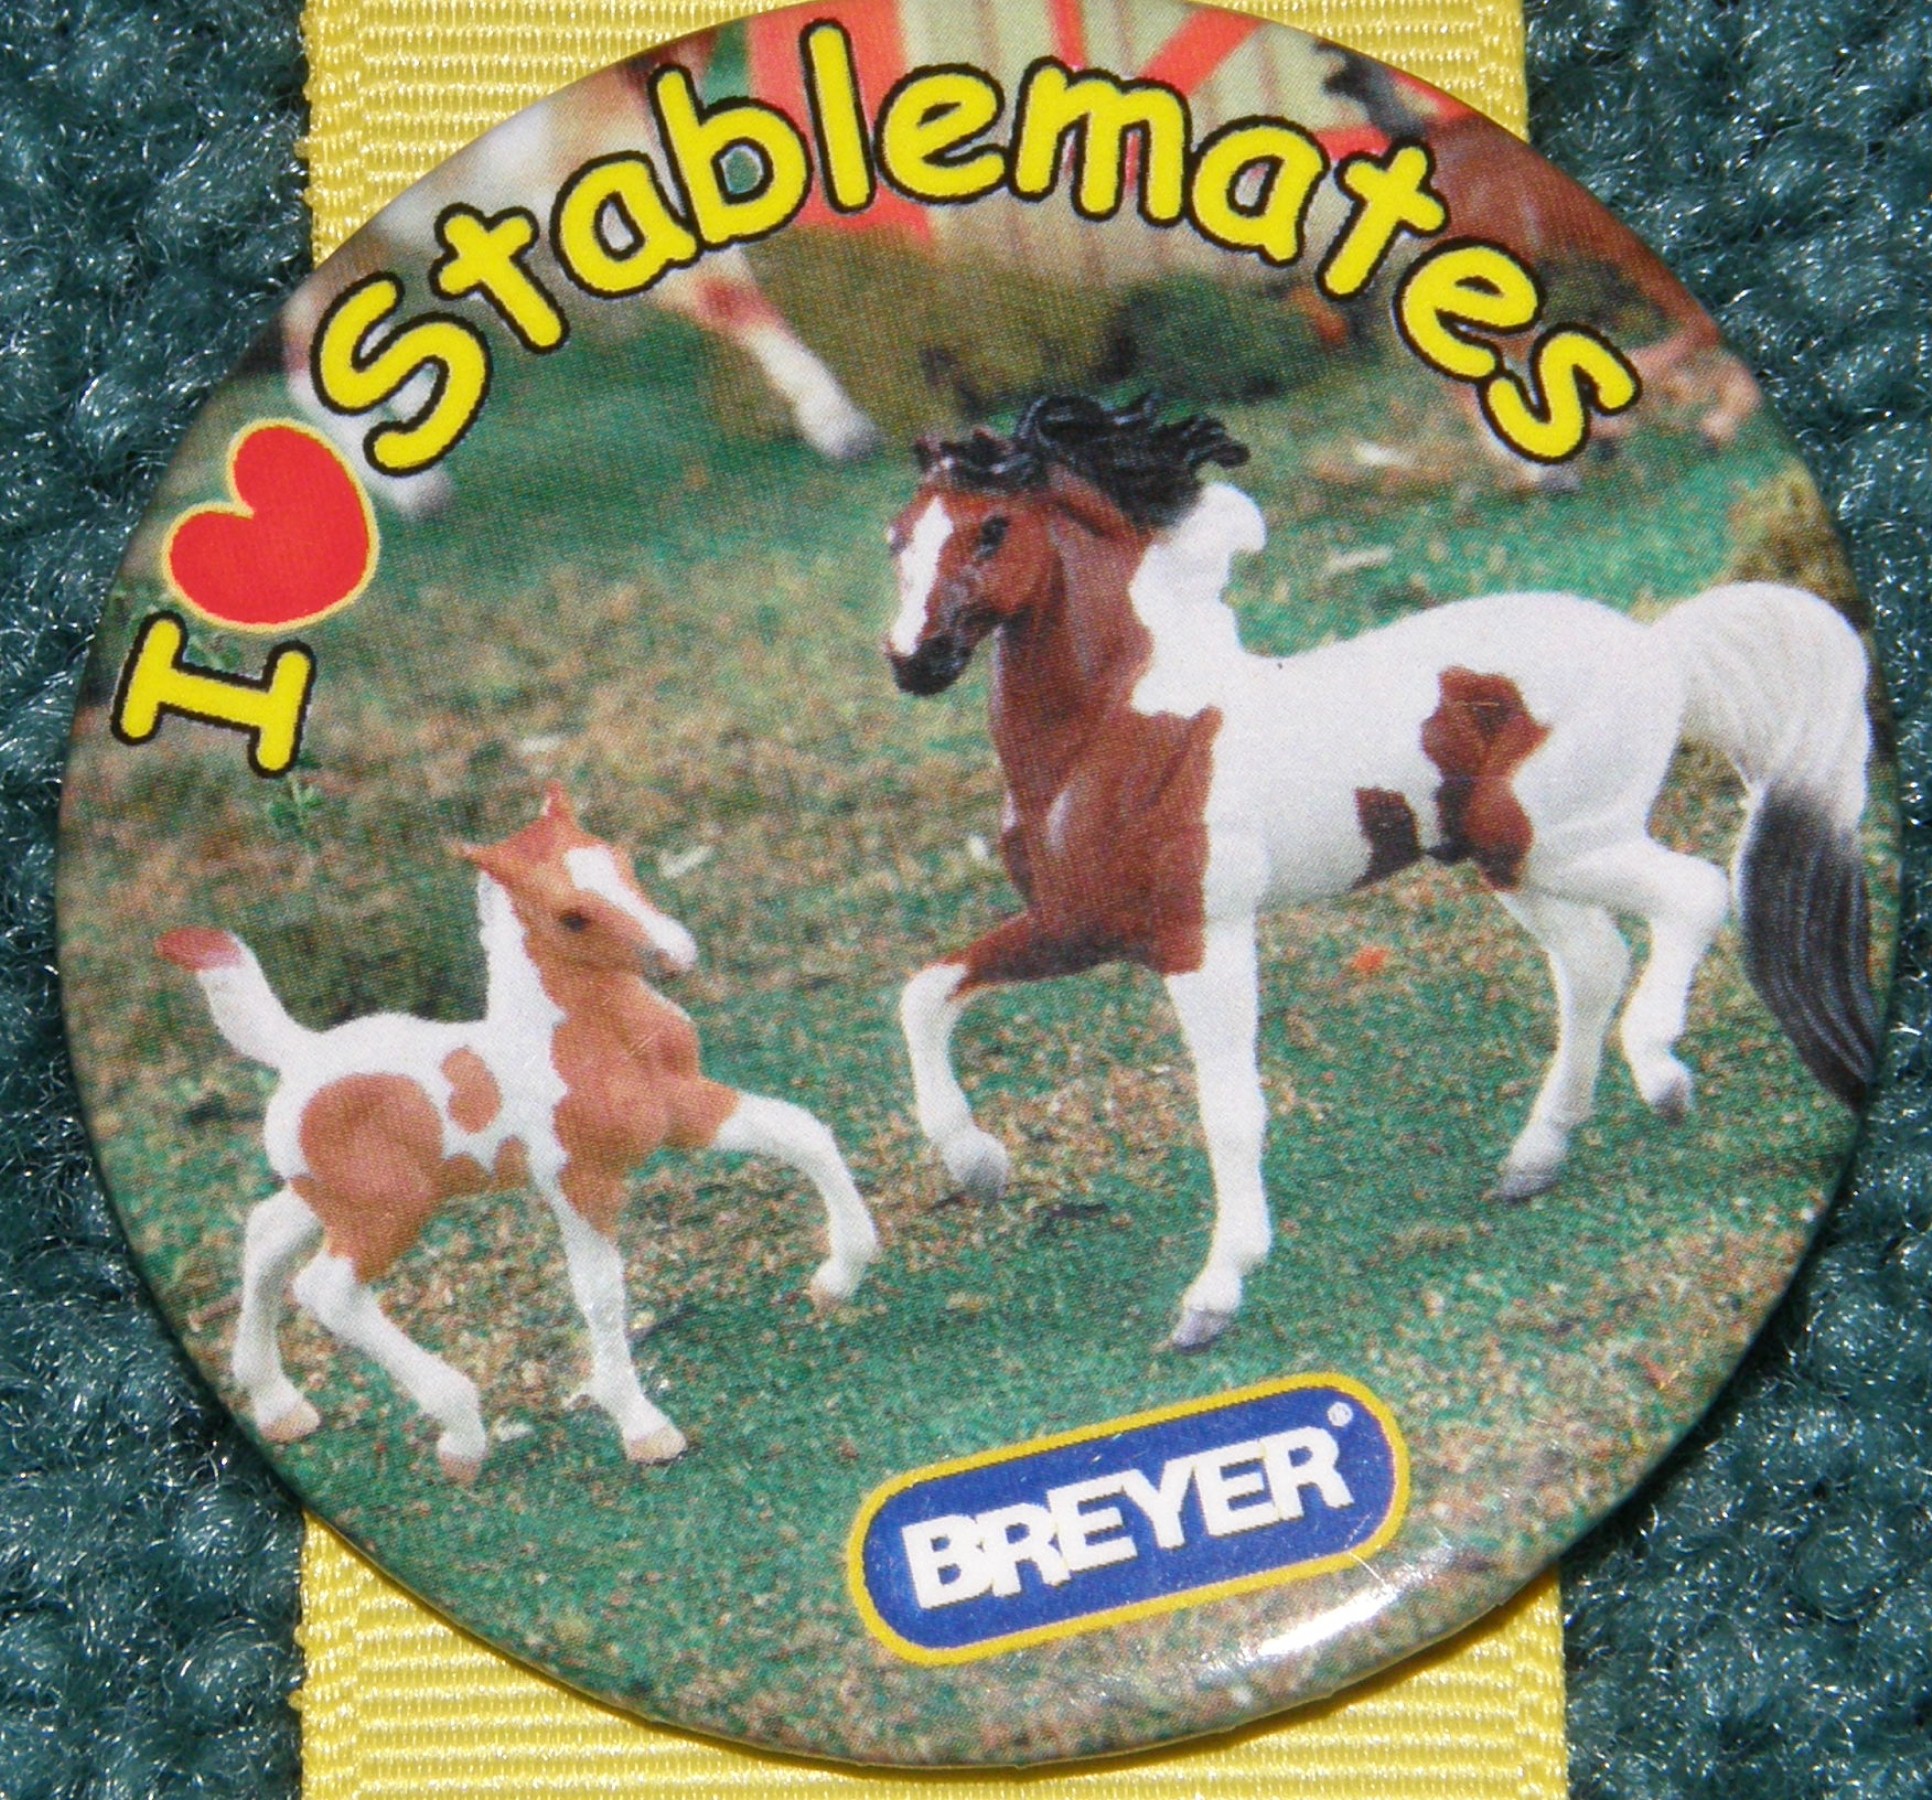 Click Here to View Breyer Buttons!